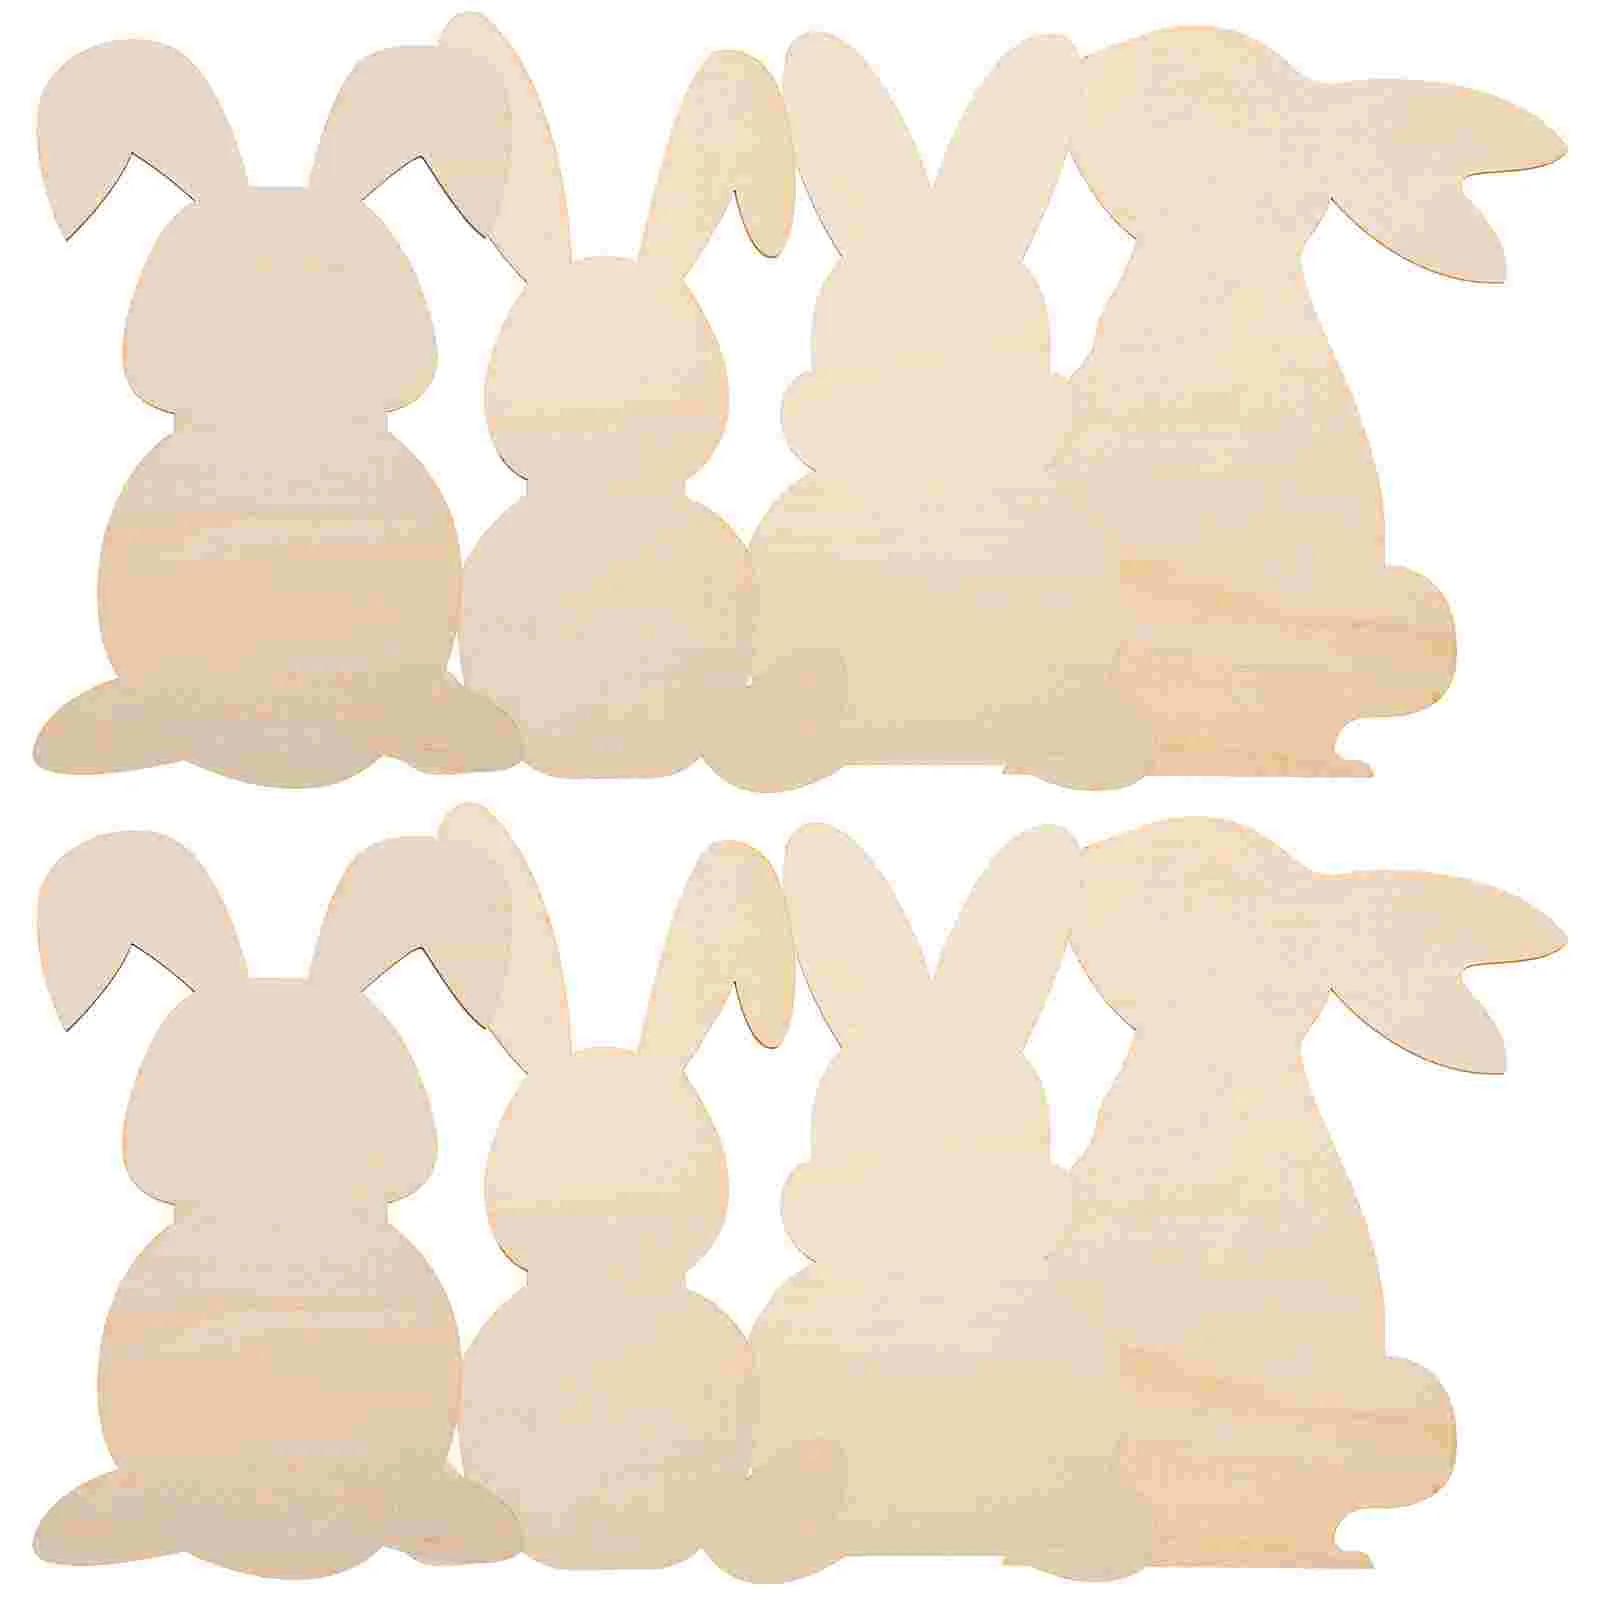 

Easter Wood Bunny Wooden Cutouts Crafts Unfinished Slices Cutout Rabbit Decorations Ornaments Blank Diy Ornament Hanging Tags